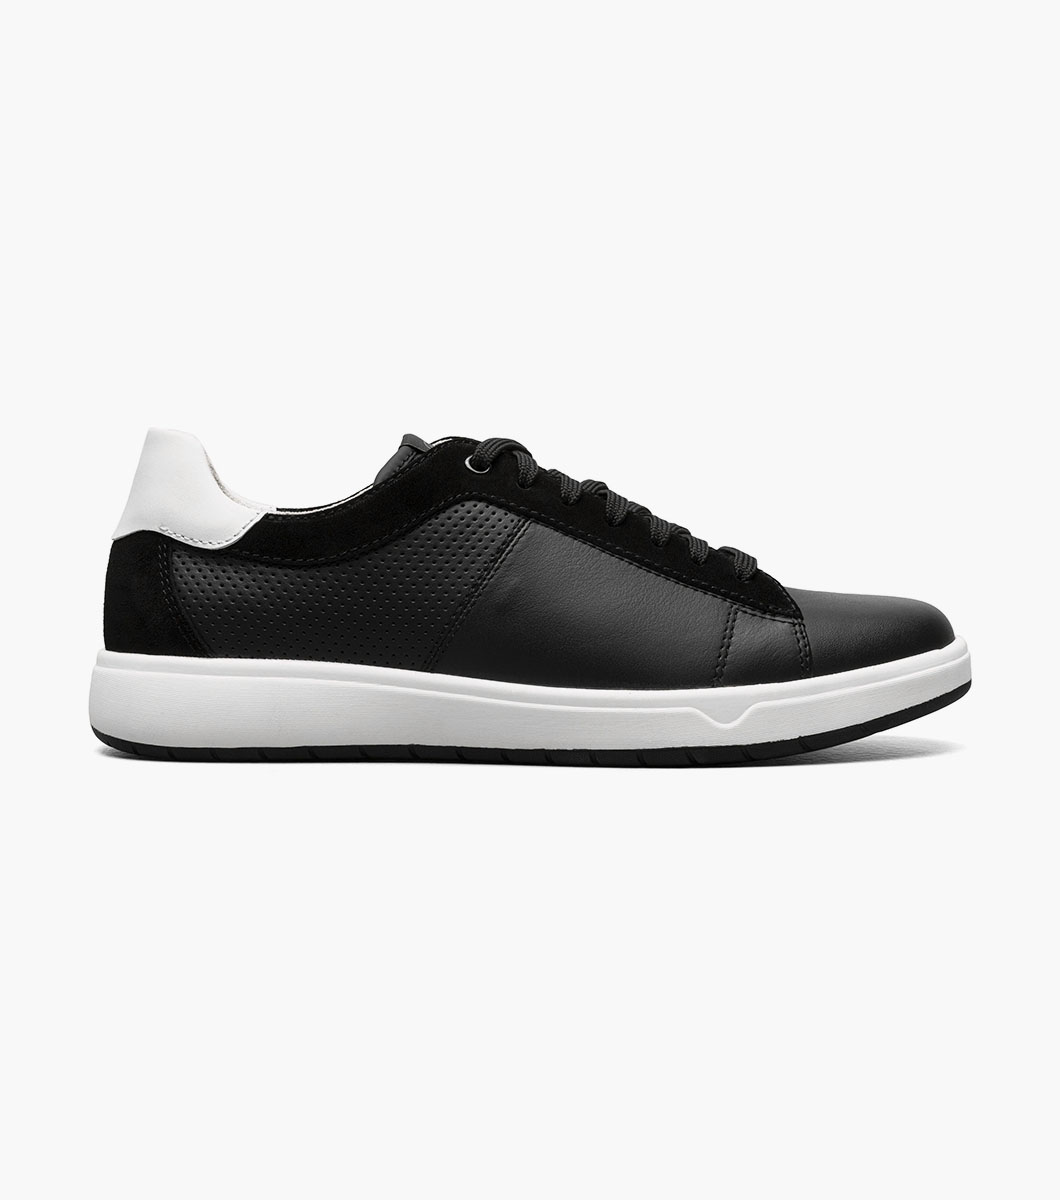 Heist Lace To Toe Sneaker All Mens Shoes | Florsheim.com